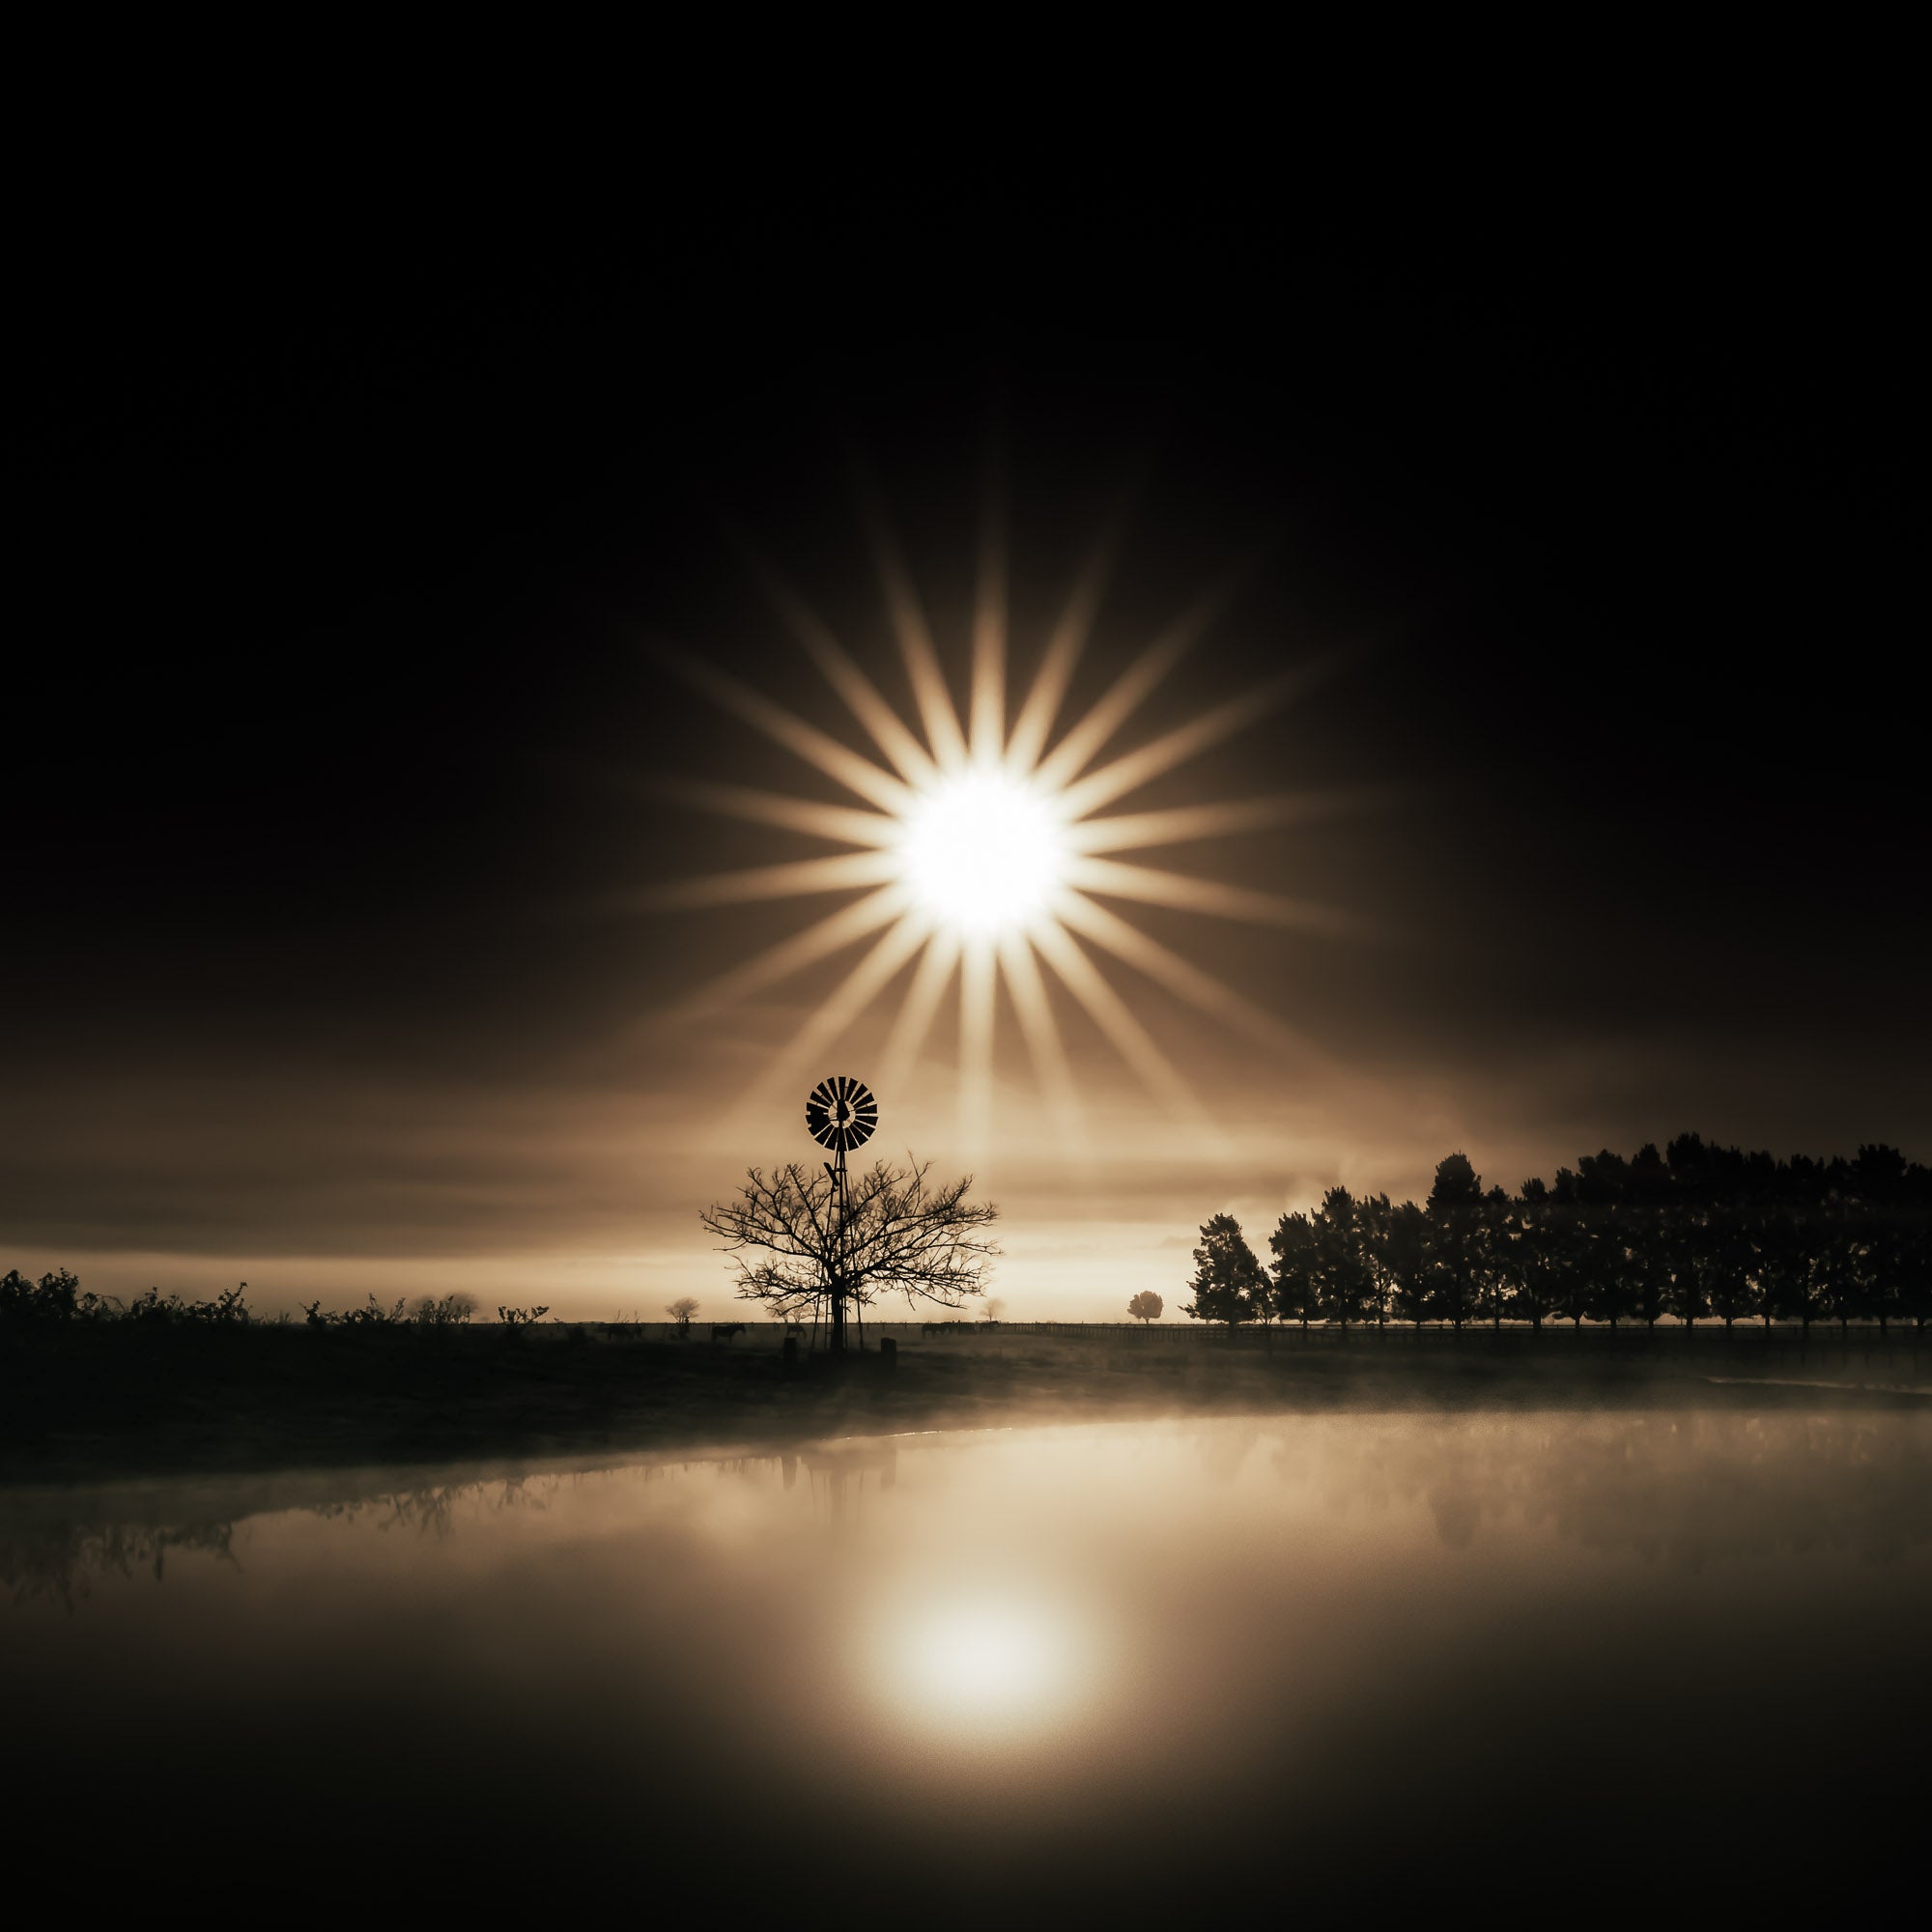 A serene sunrise with a lone tree silhouette against a bright sunburst, reflected on a calm water surface.